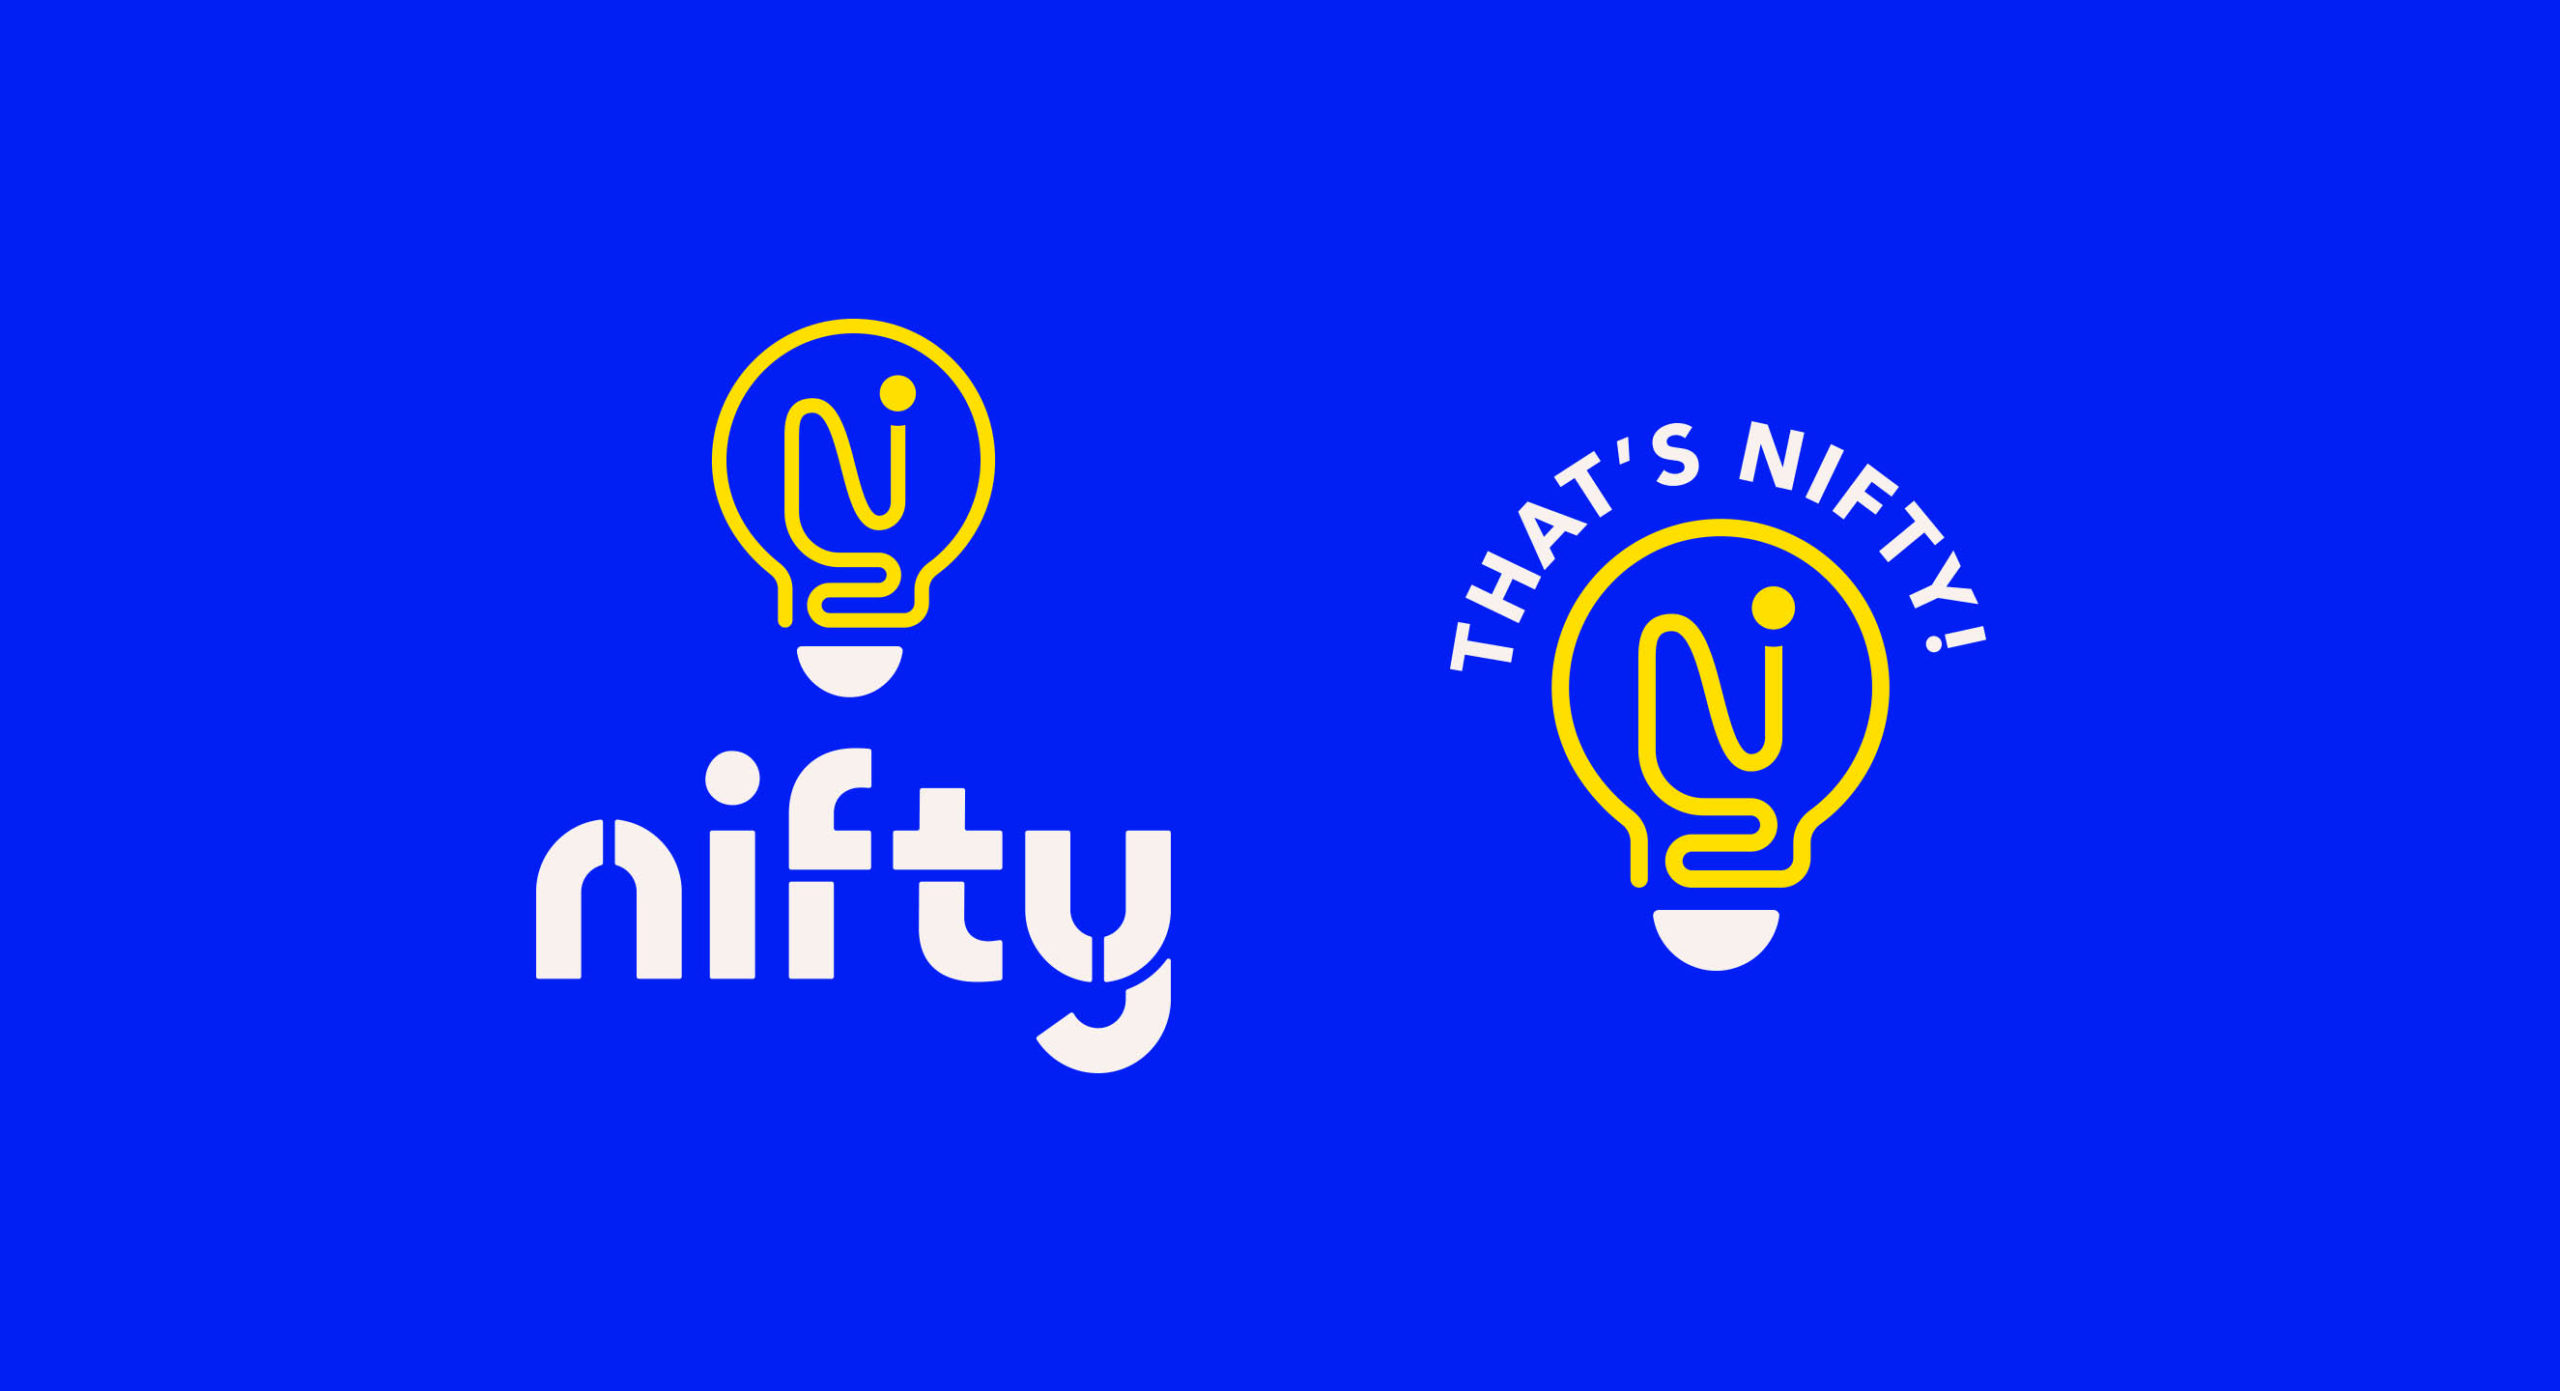 Witty brand logo and icon lockups for retail tech brand Nifty